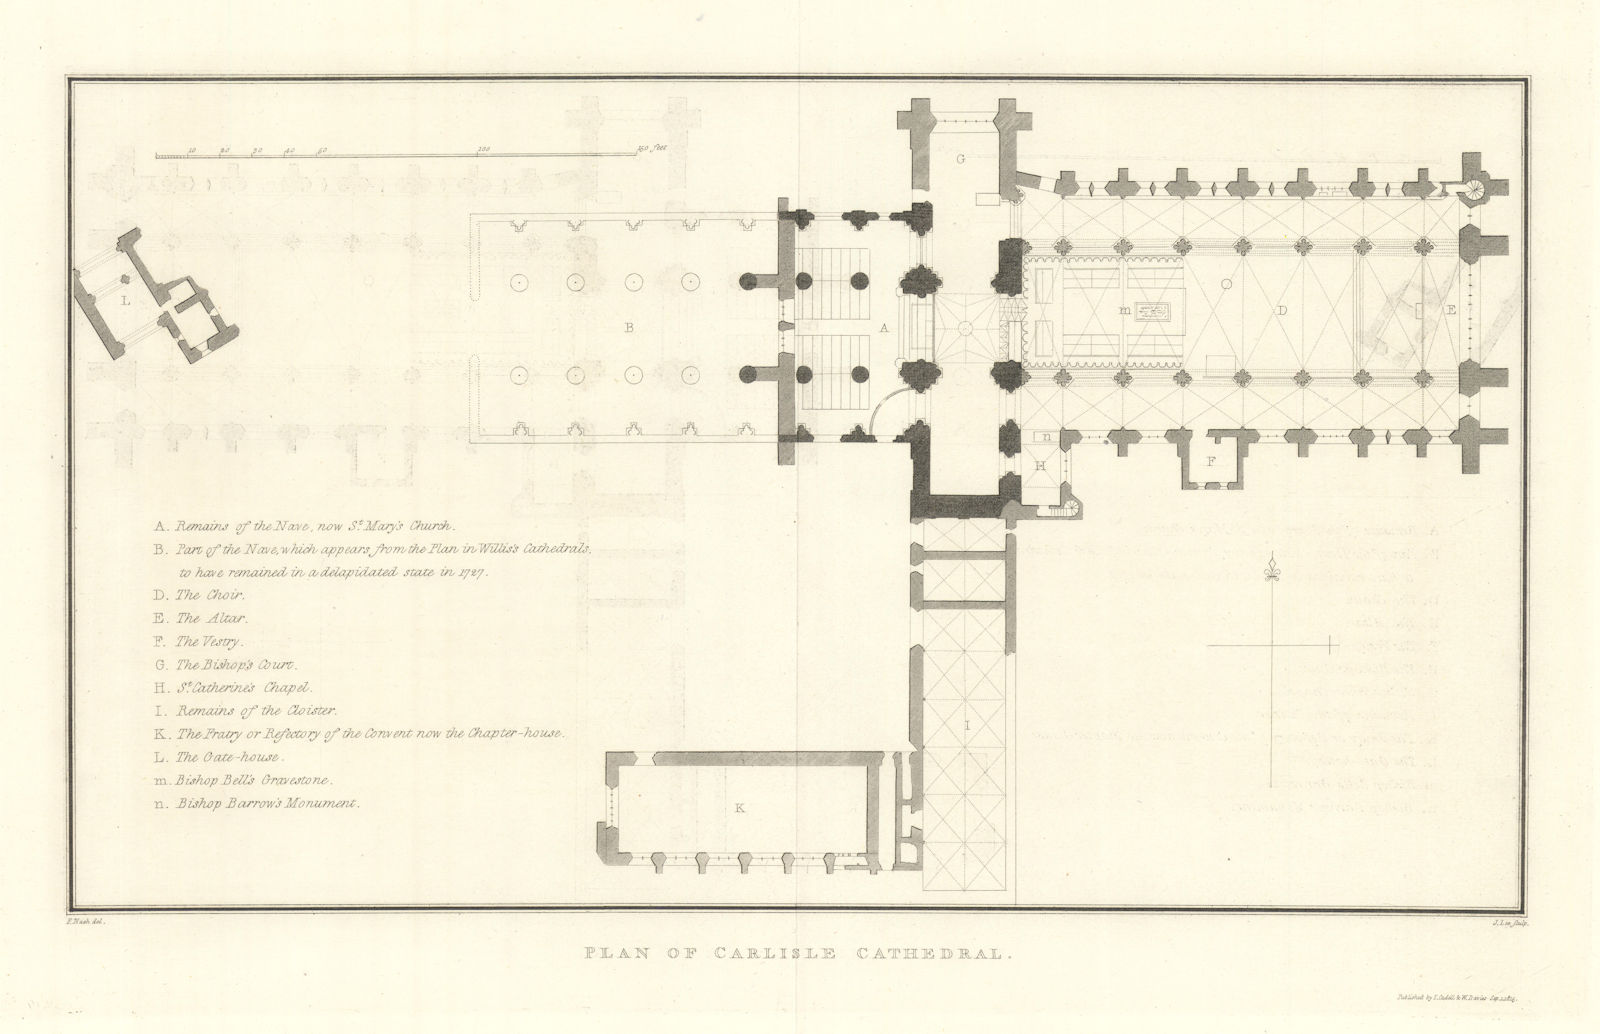 Associate Product Floor plan of Carlisle Cathedral. NASH 1816 old antique vintage map chart